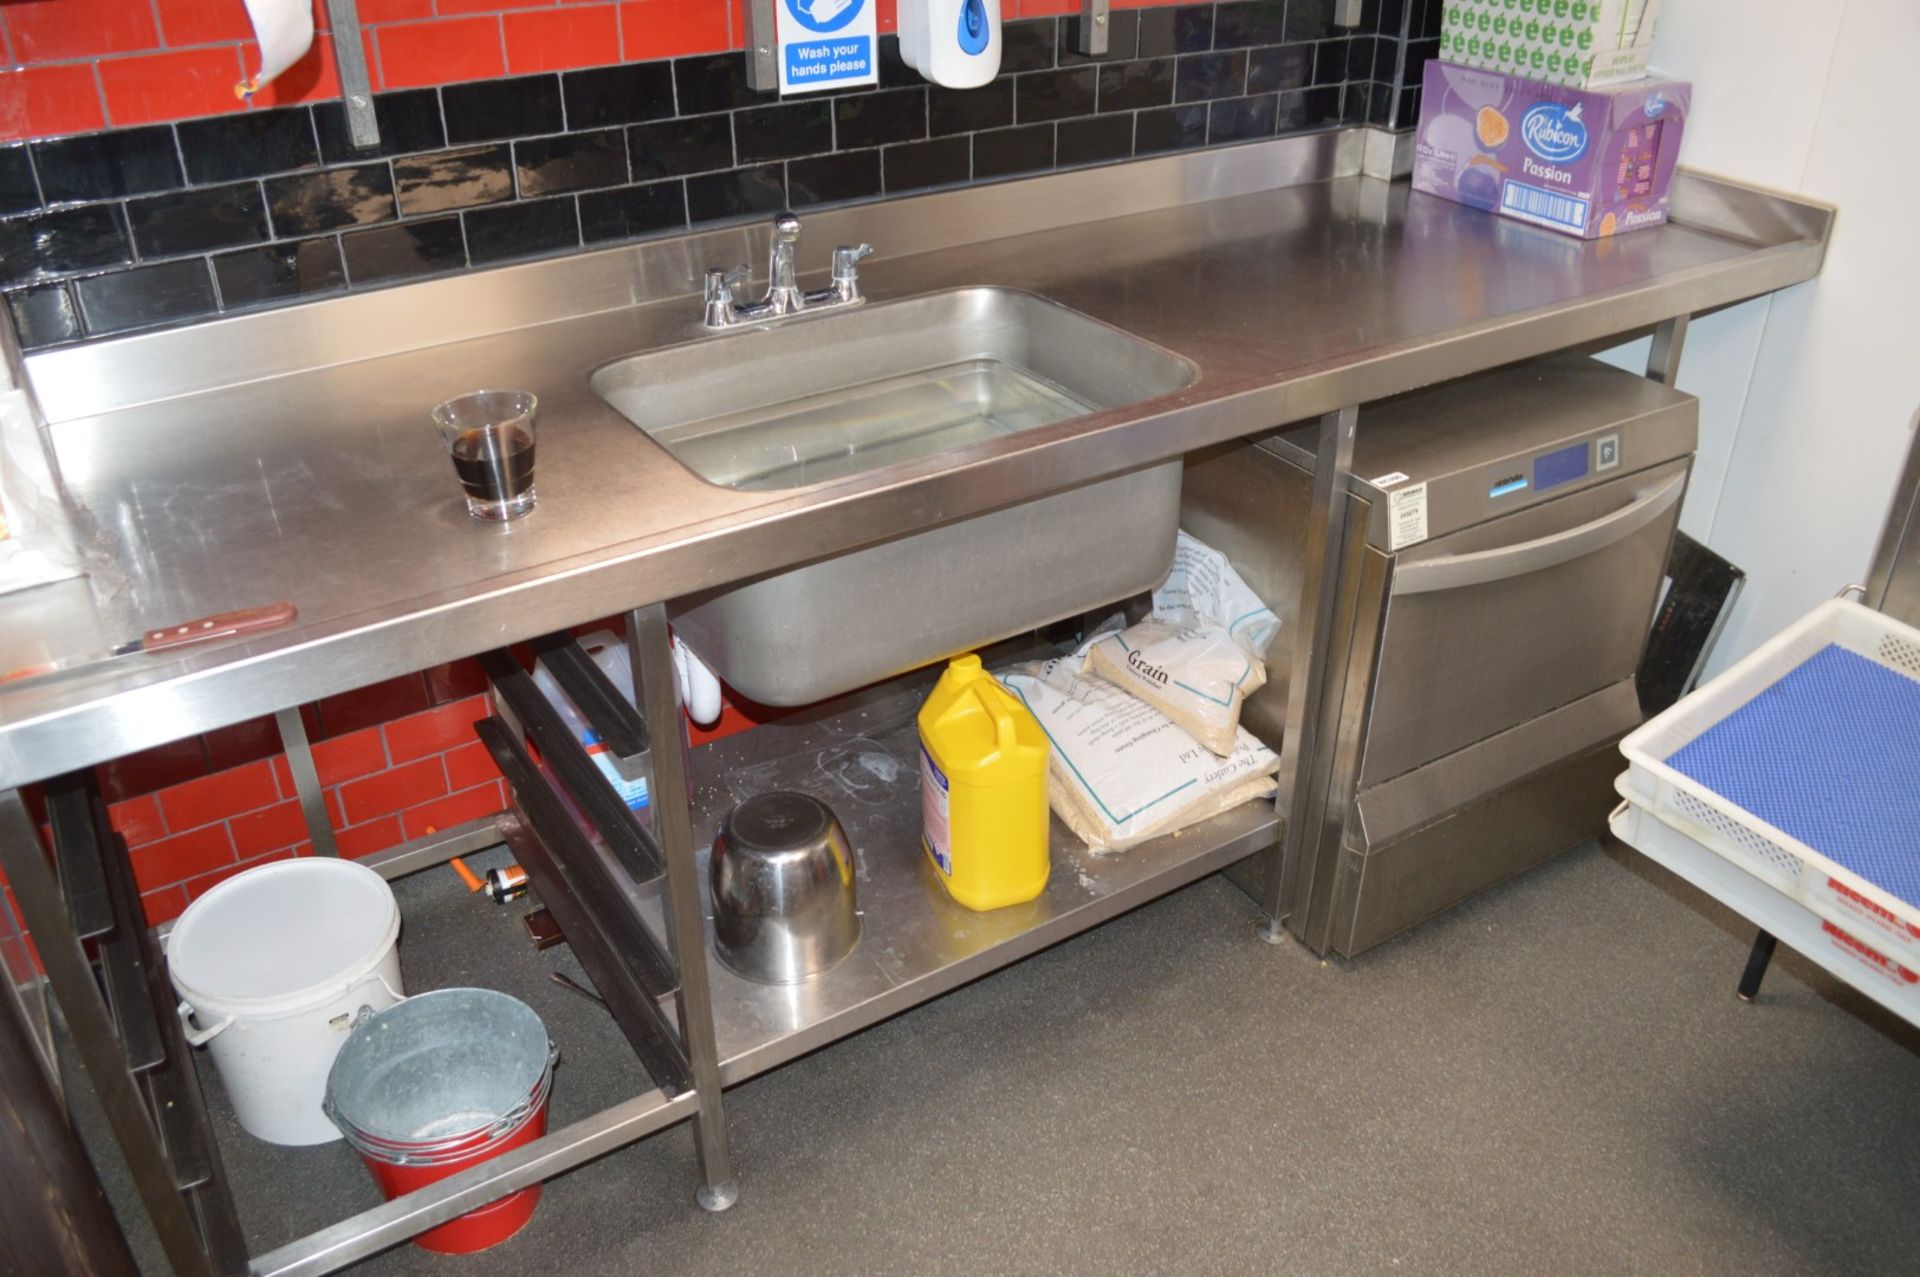 1 x Large Stainless Steel Wash Prep Table - Features Large Sink Bowl With Mixer Taps, Undershelf, - Image 2 of 3